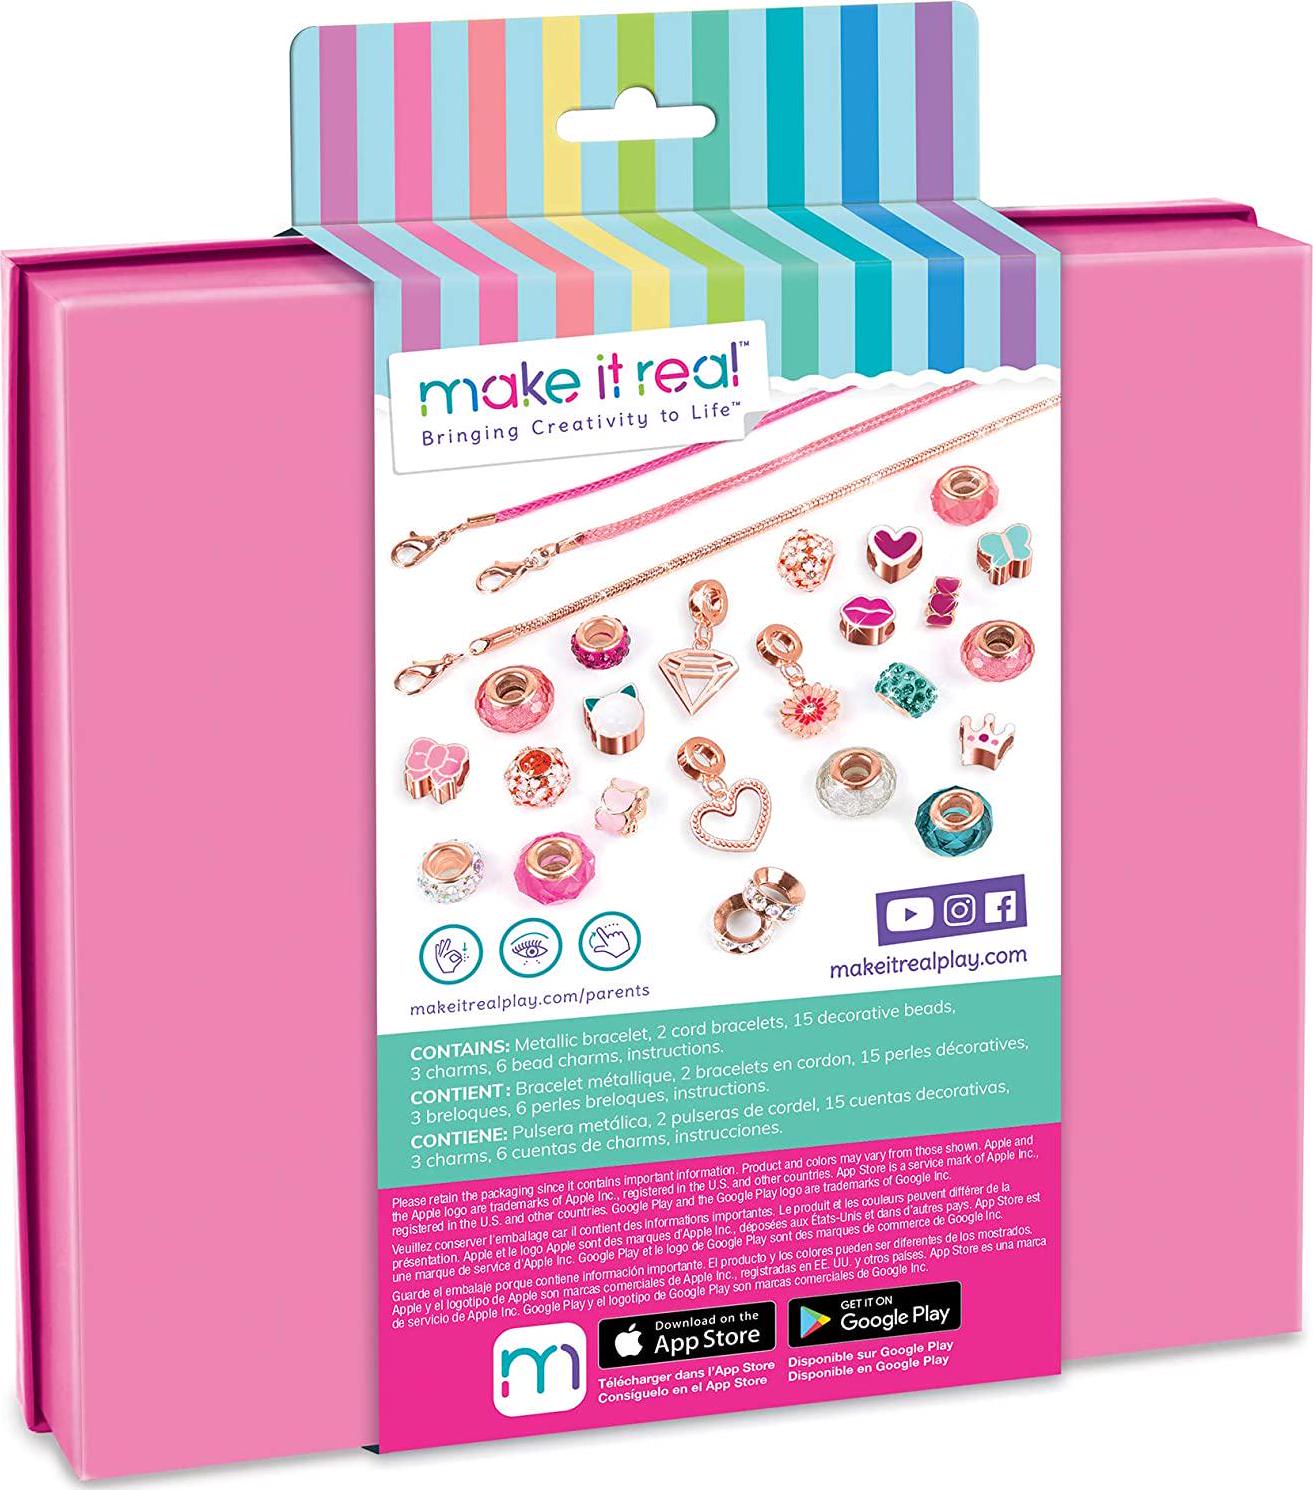 Make It Real, Make It Real - Halo Charms Bracelets Think Pink - DIY Charm Bracelet Making Kit - Friendship Bracelet Kit with Beads, Charms and Cord - Arts and Crafts Bead Kit for Girls - Makes 3 Bracelets